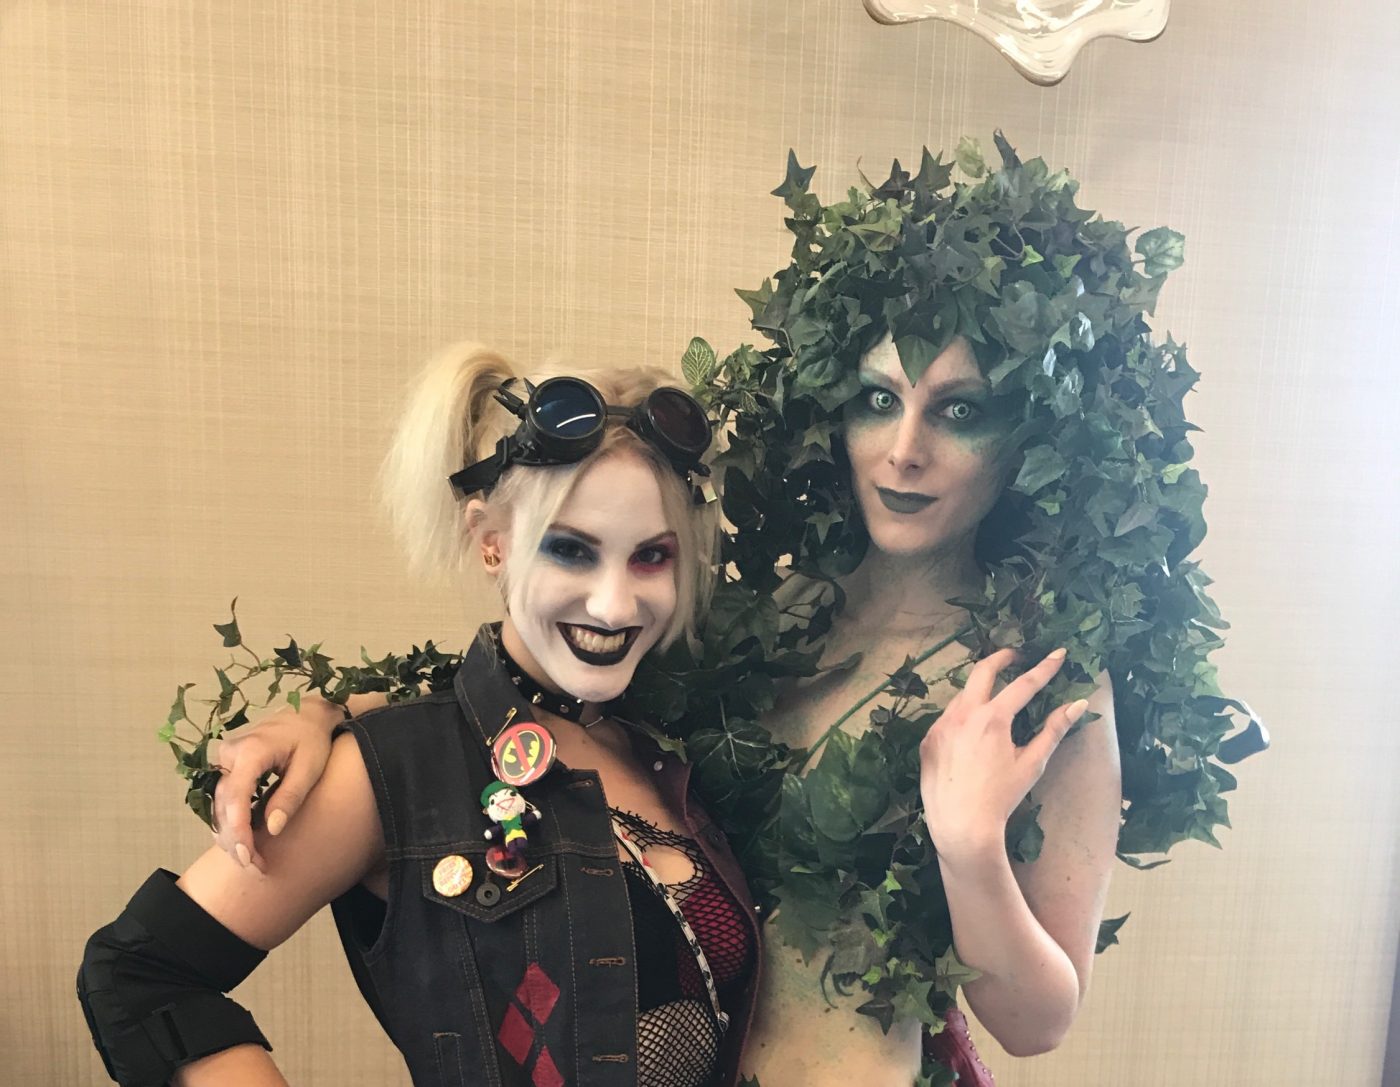 SDCC 2017: Who wore it best? Poison Ivy cosplay